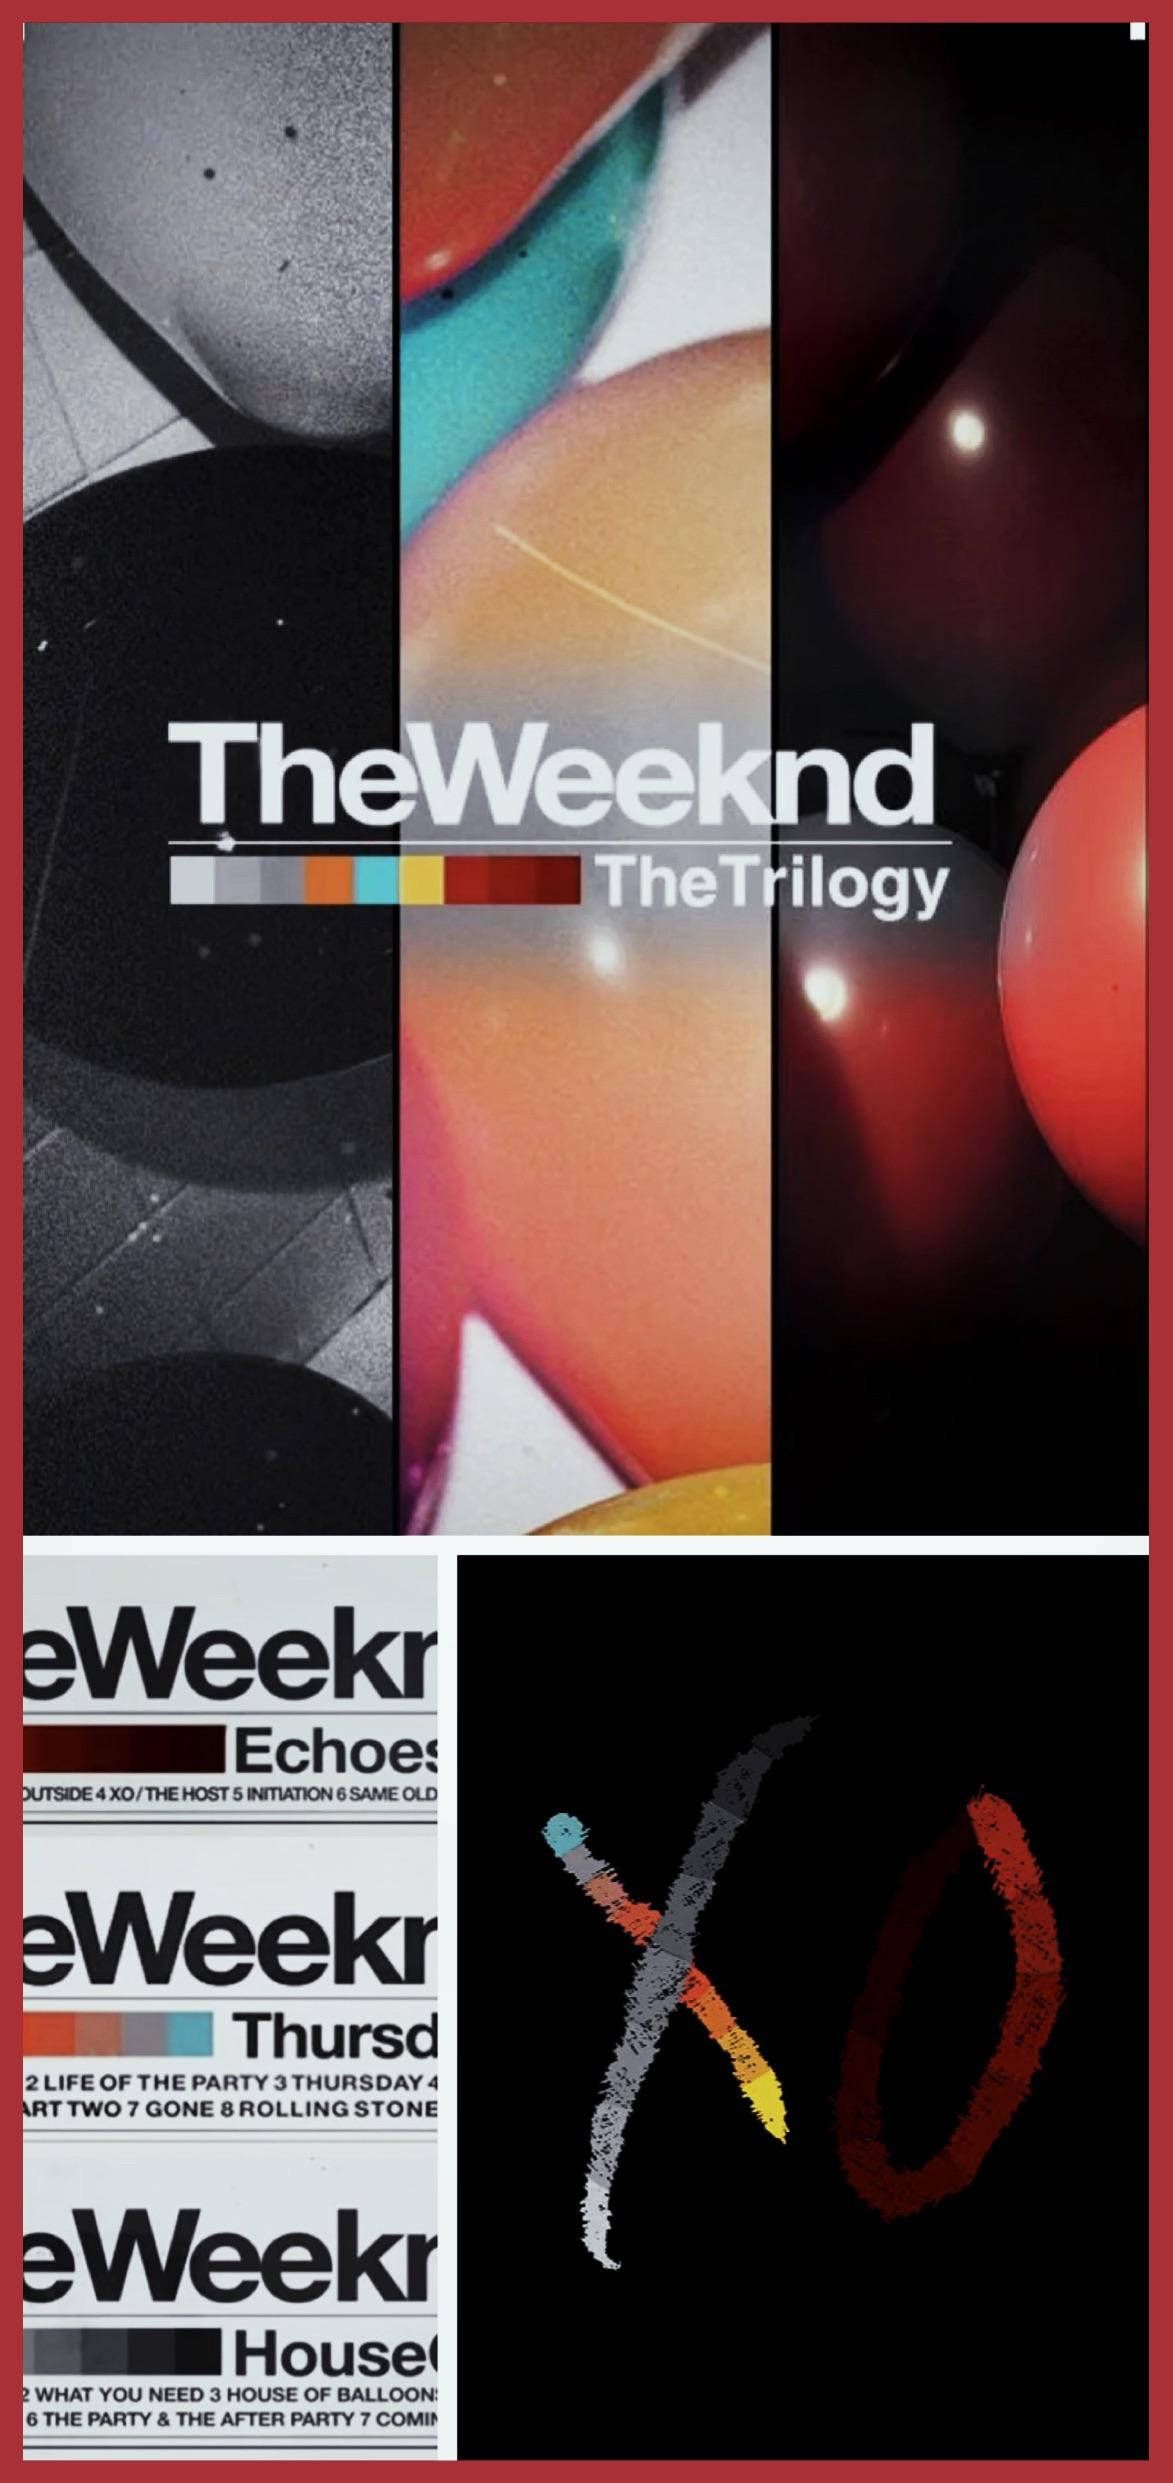 Download The Weeknd Trilogy Collage Wallpaper